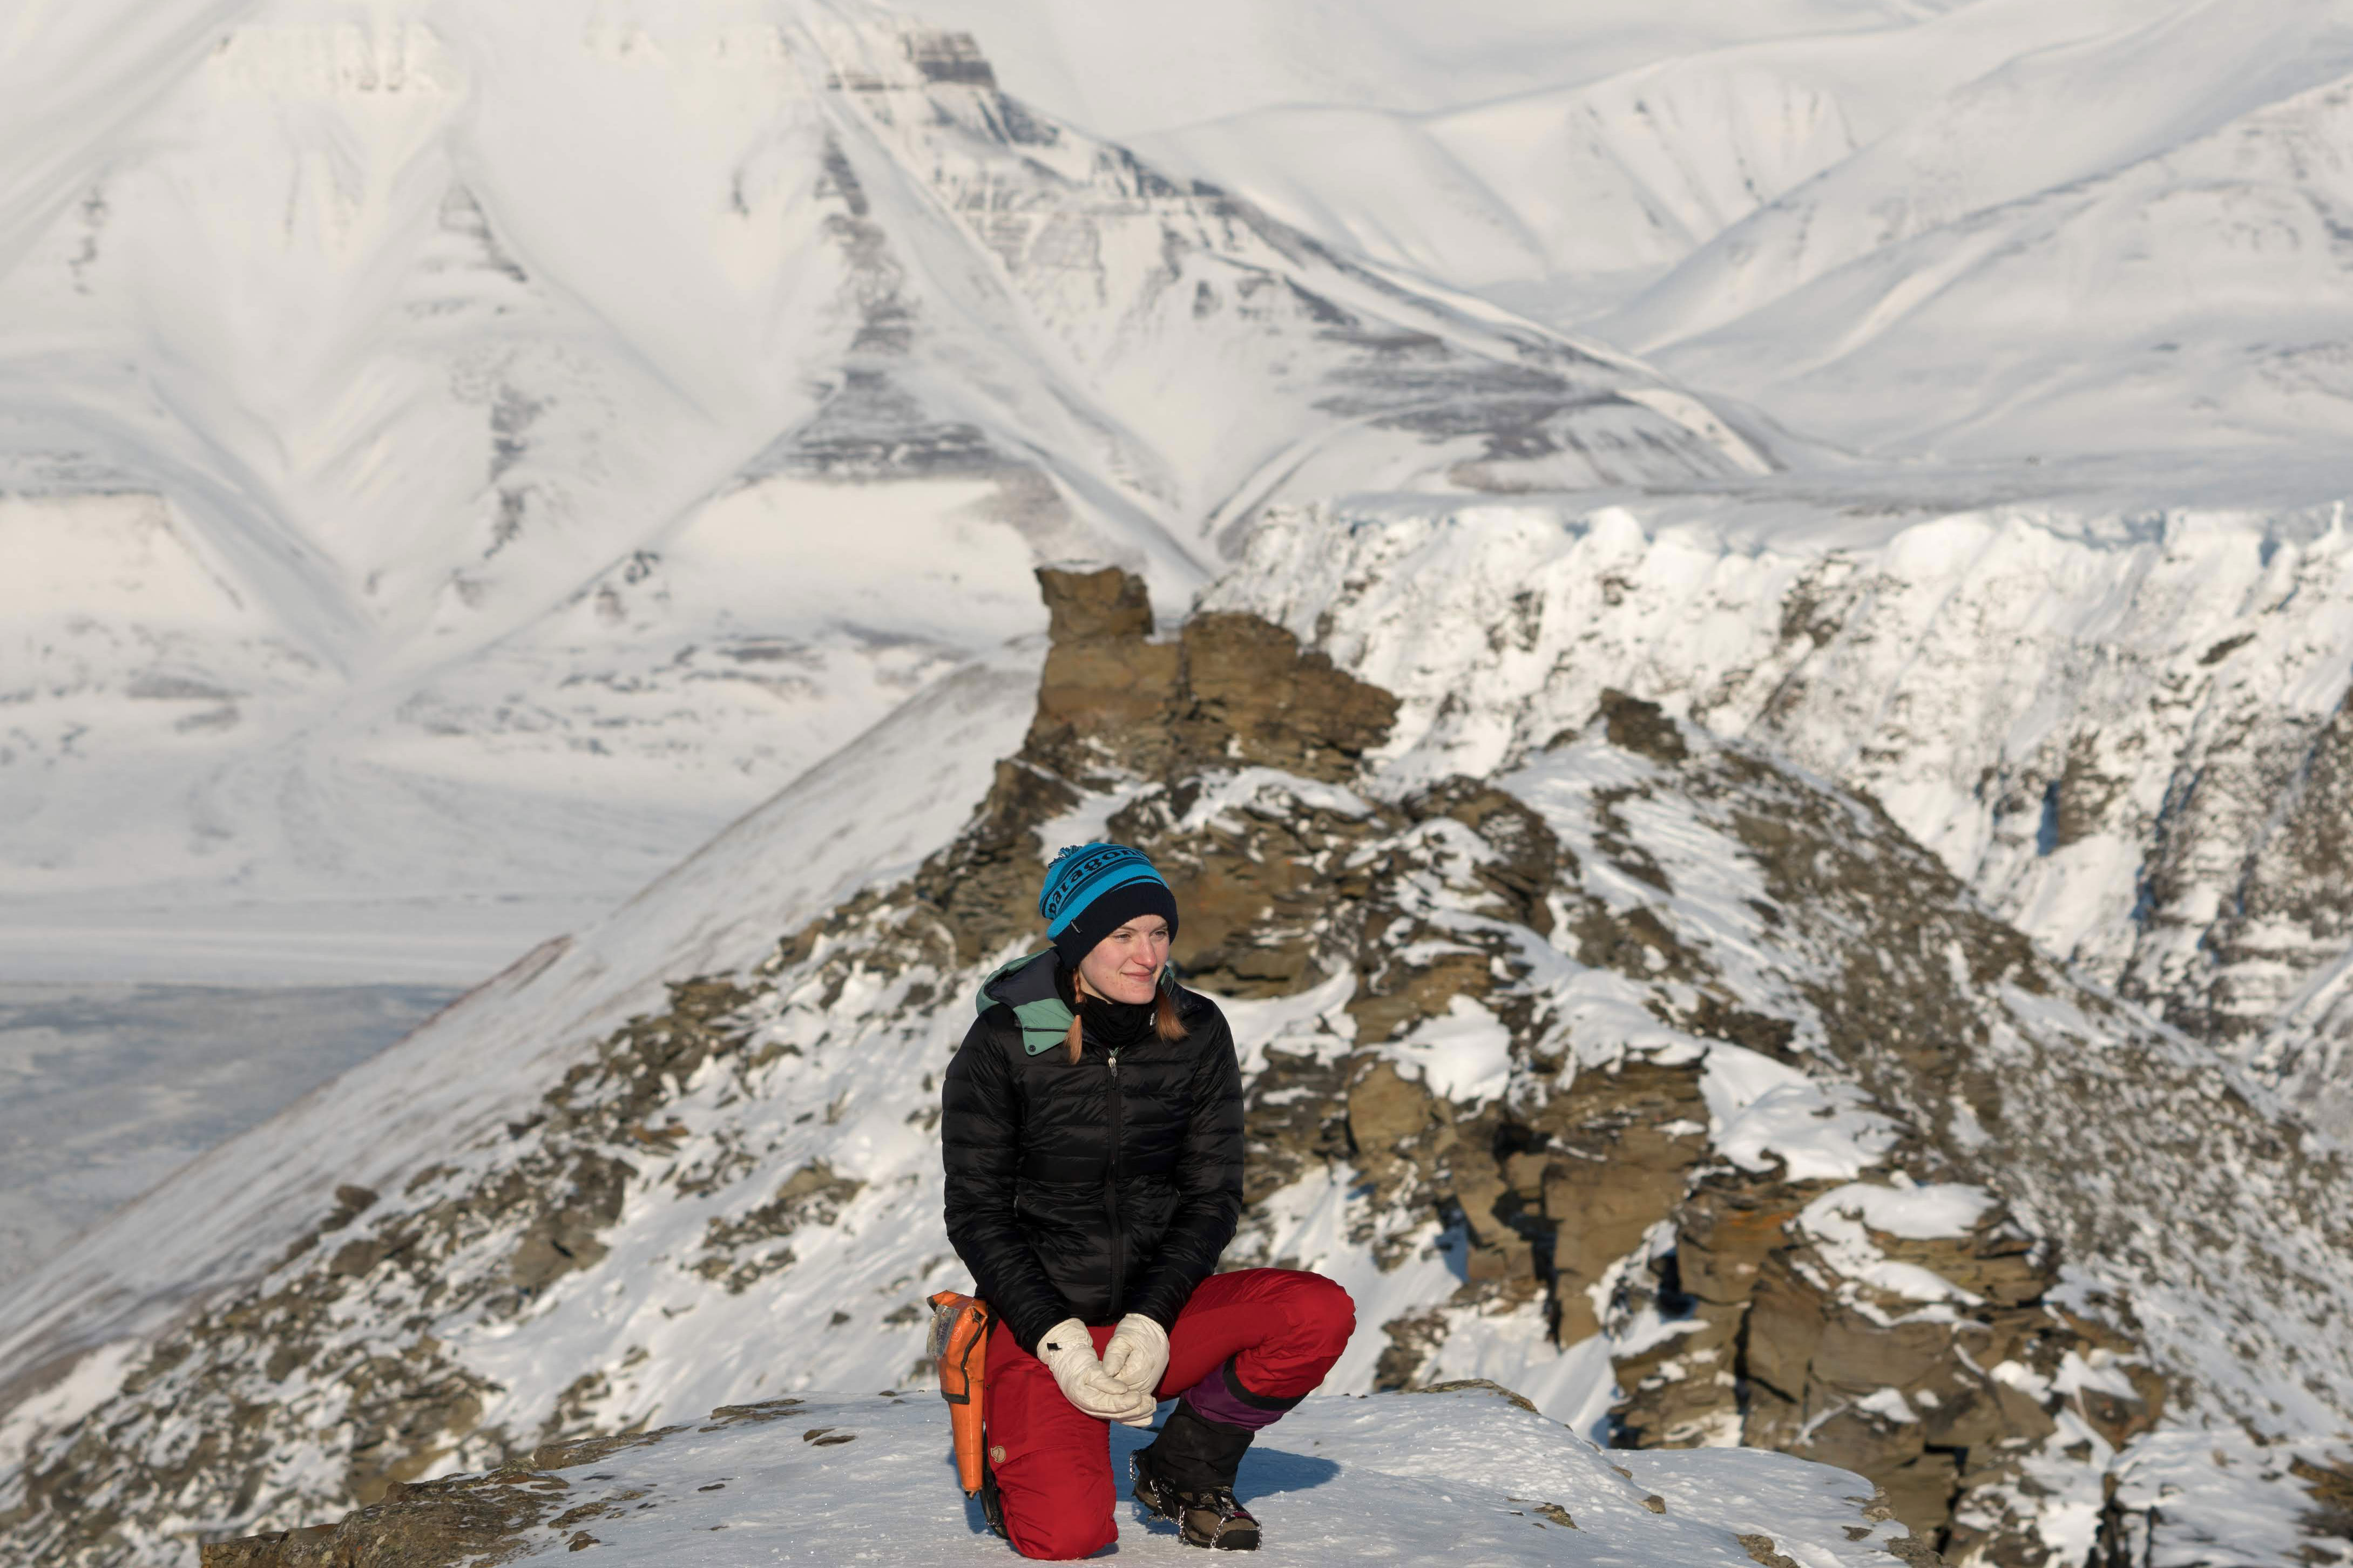 A woman crouches for a picture with an icy mountainous range in the background.